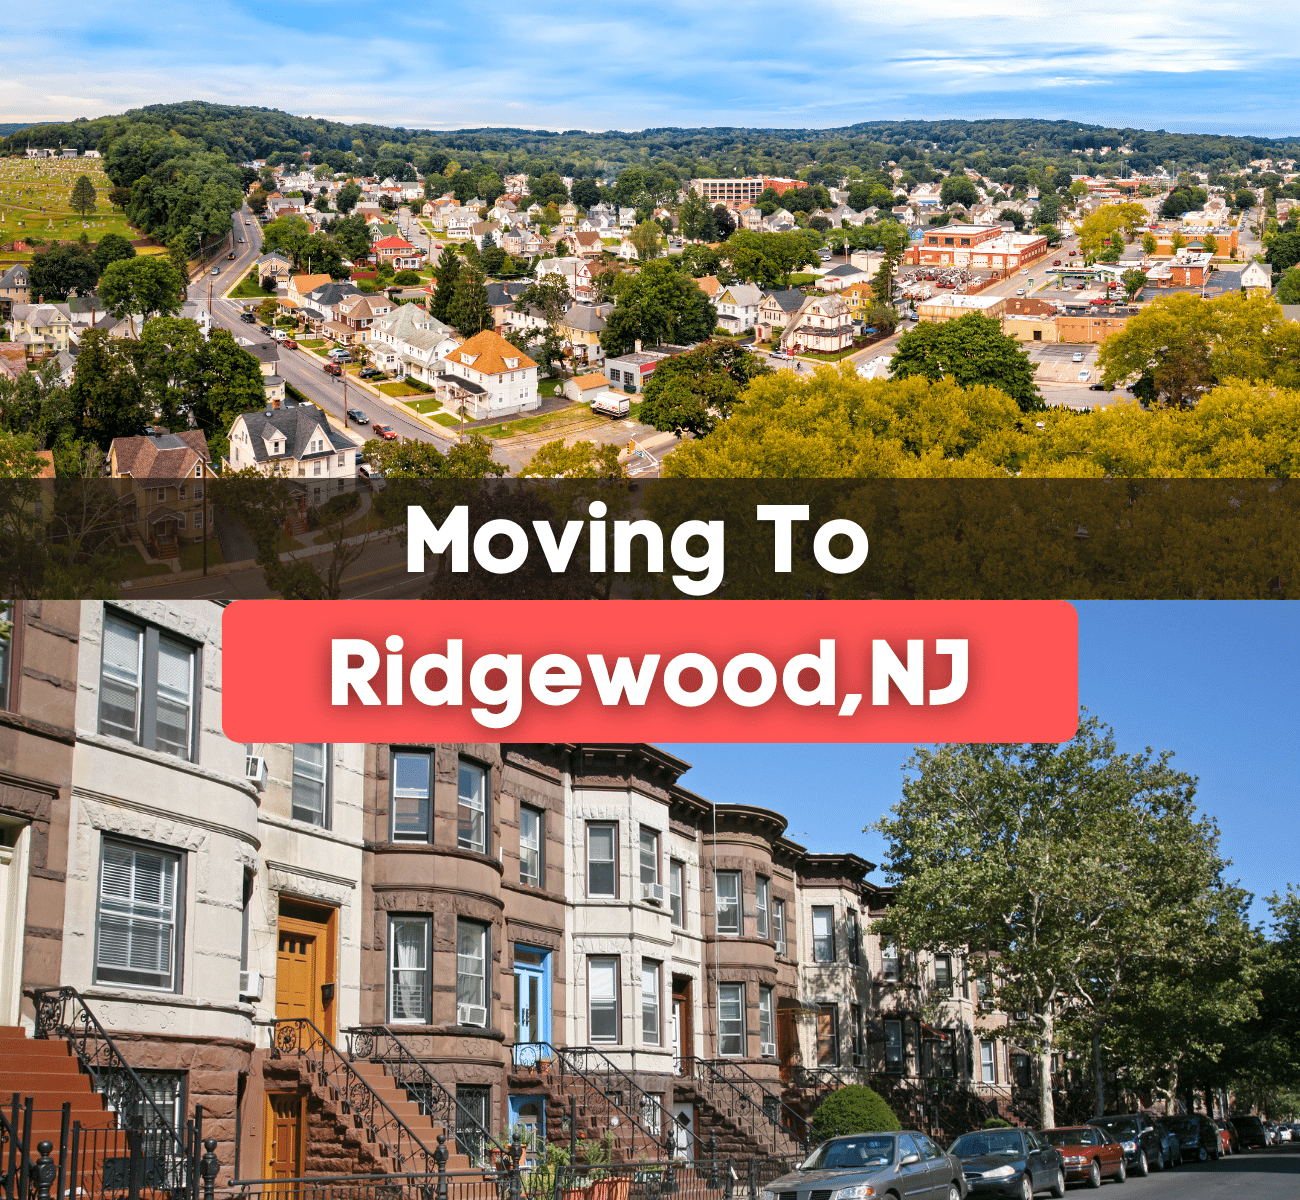 Moving to Ridgewood, NJ - row houses and aerial view of Ridgewood